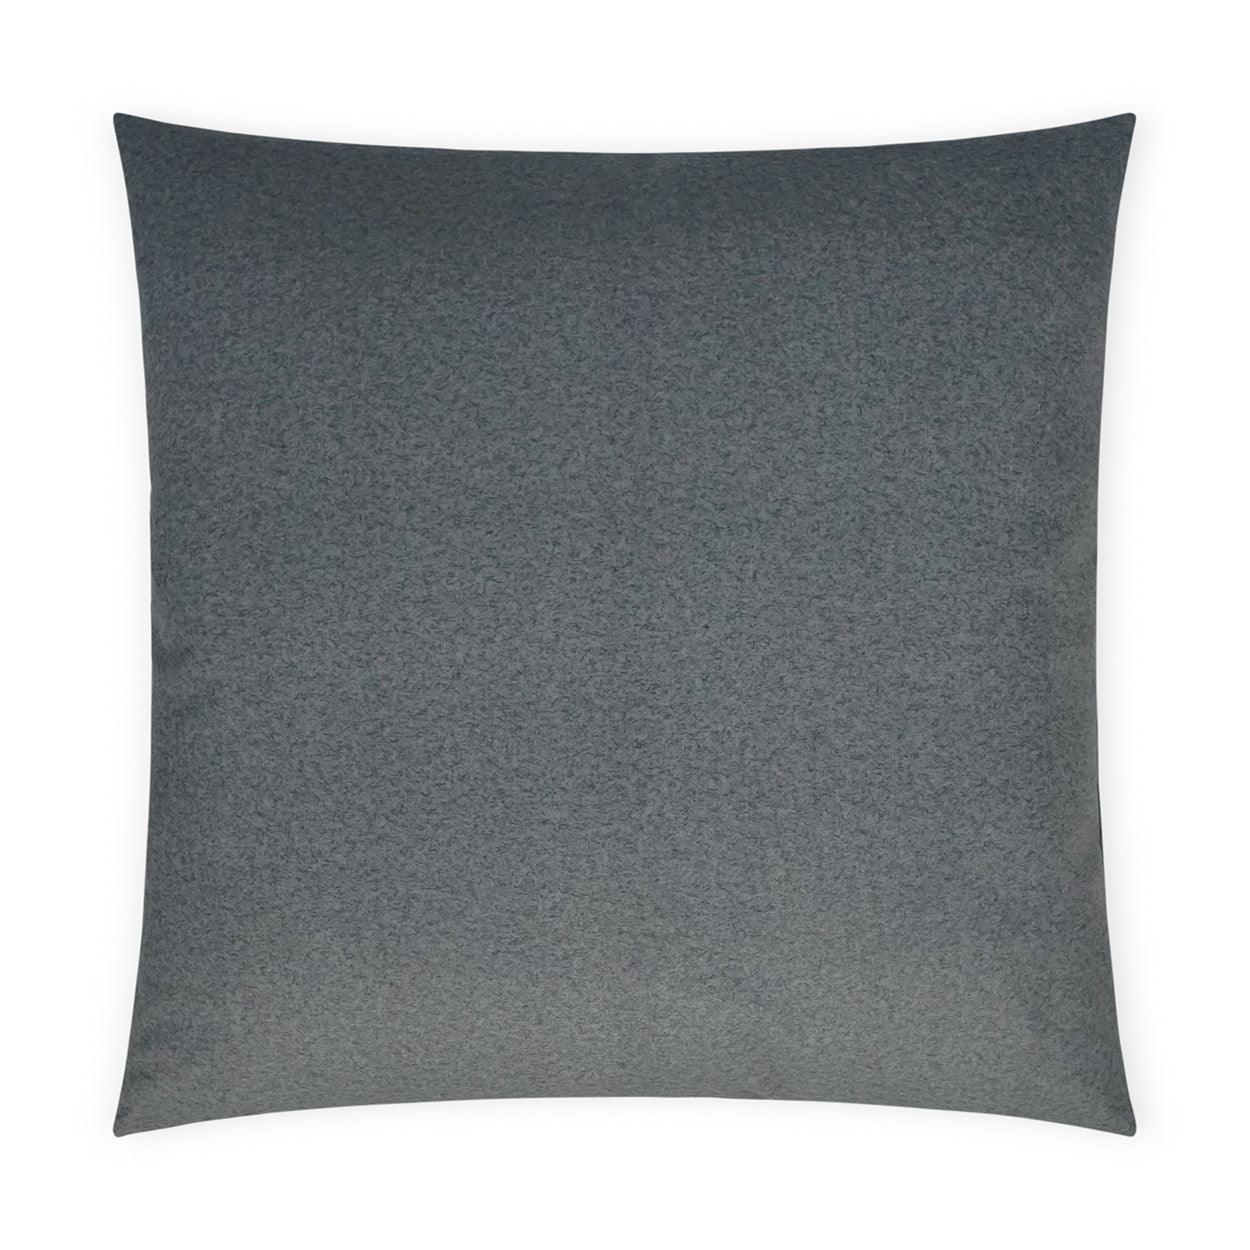 Merino Flannel Solid Grey Large Throw Pillow With Insert - Uptown Sebastian